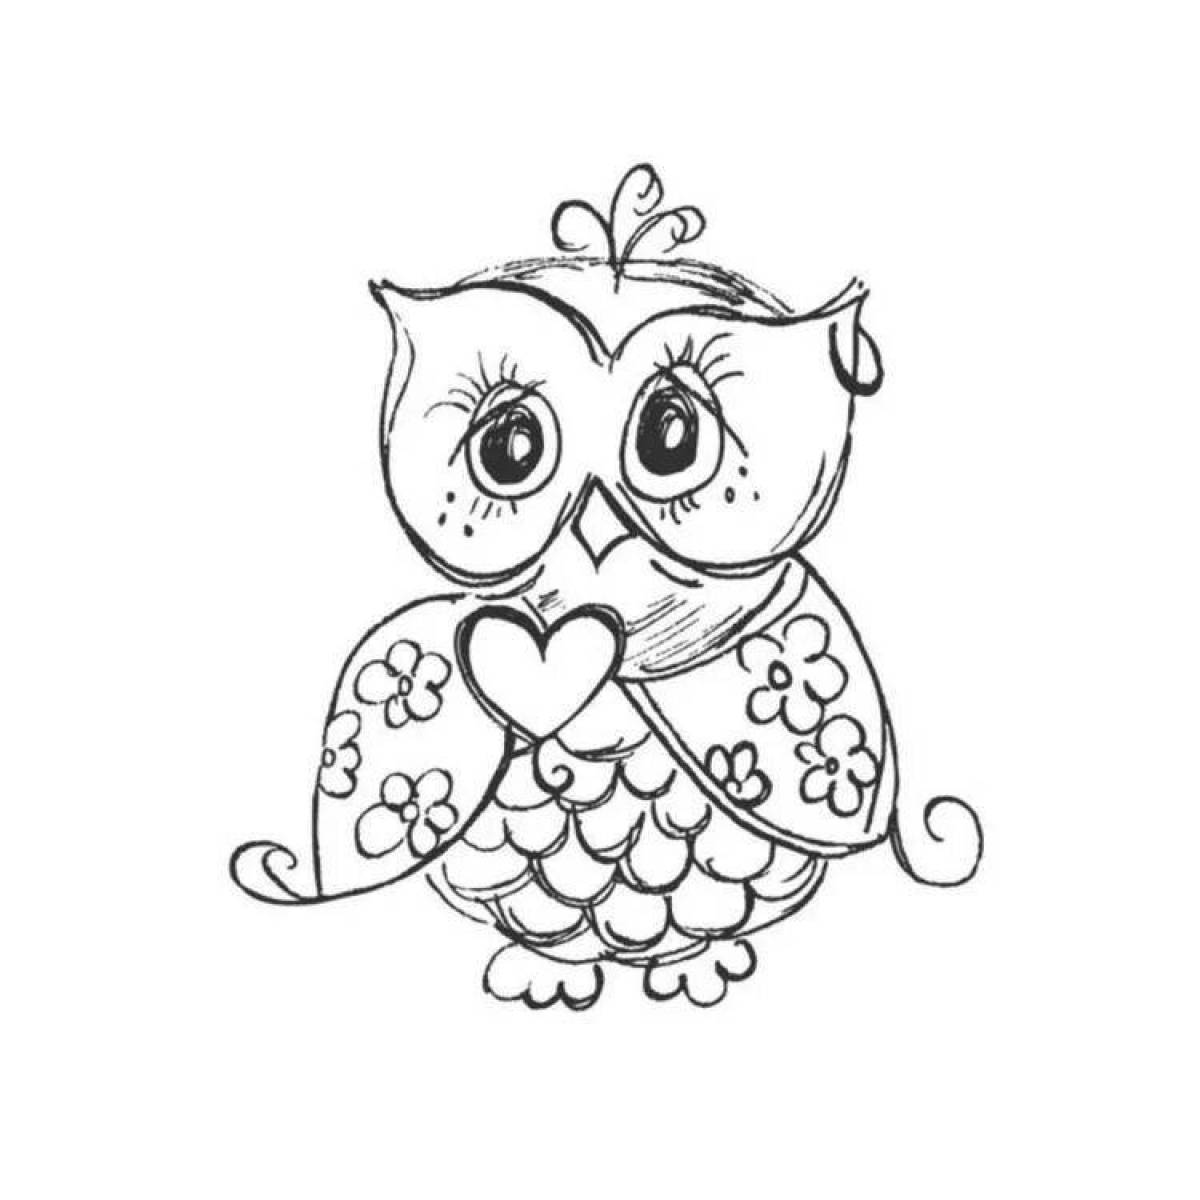 Sweet owlet hip hop coloring page